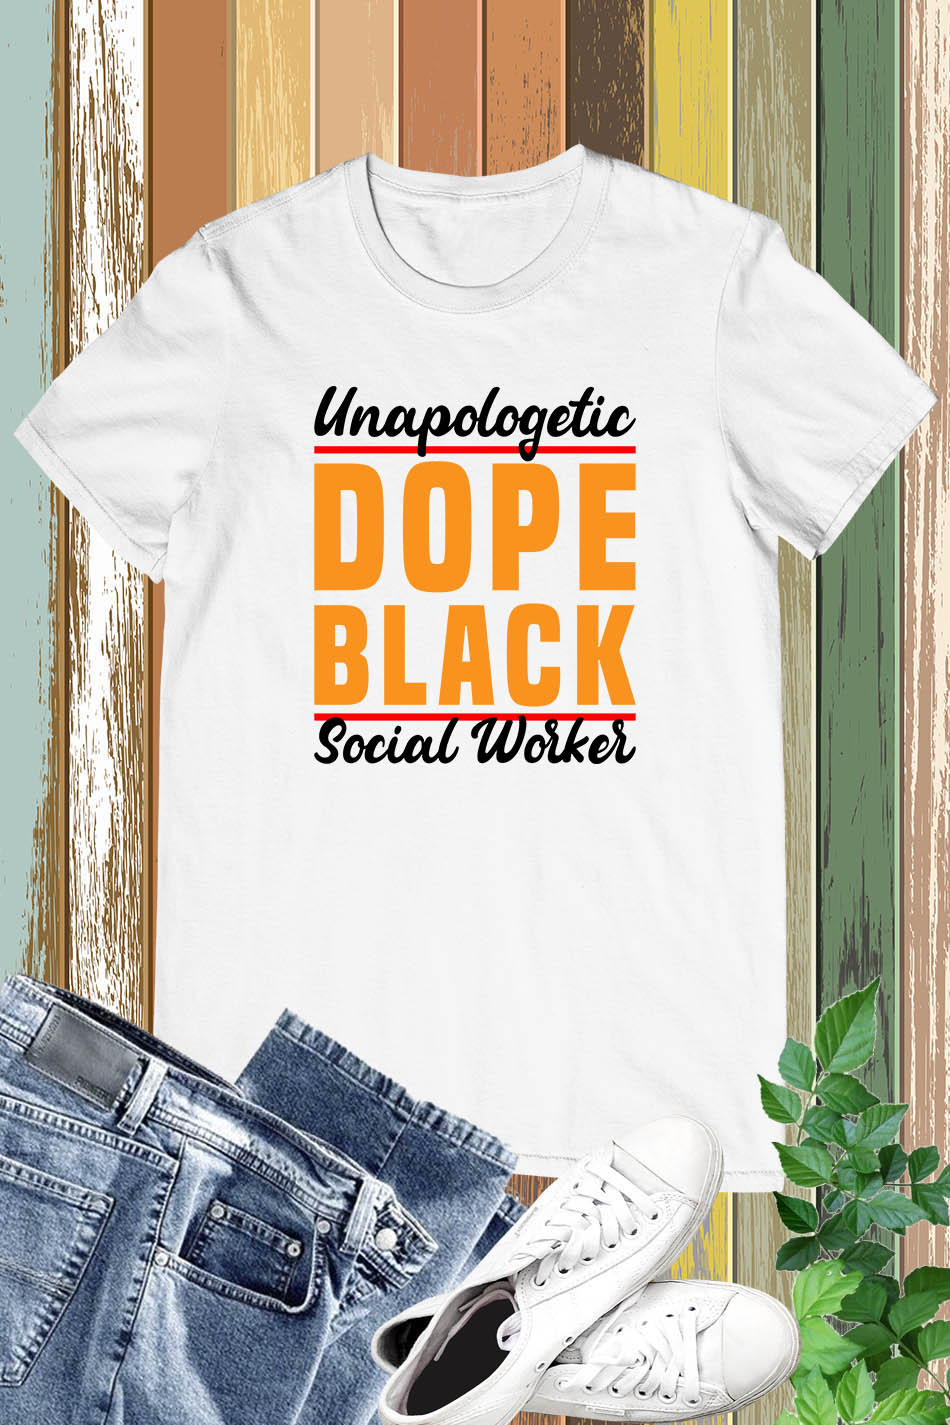 Unapologetically Dope Black Social Worker Shirt